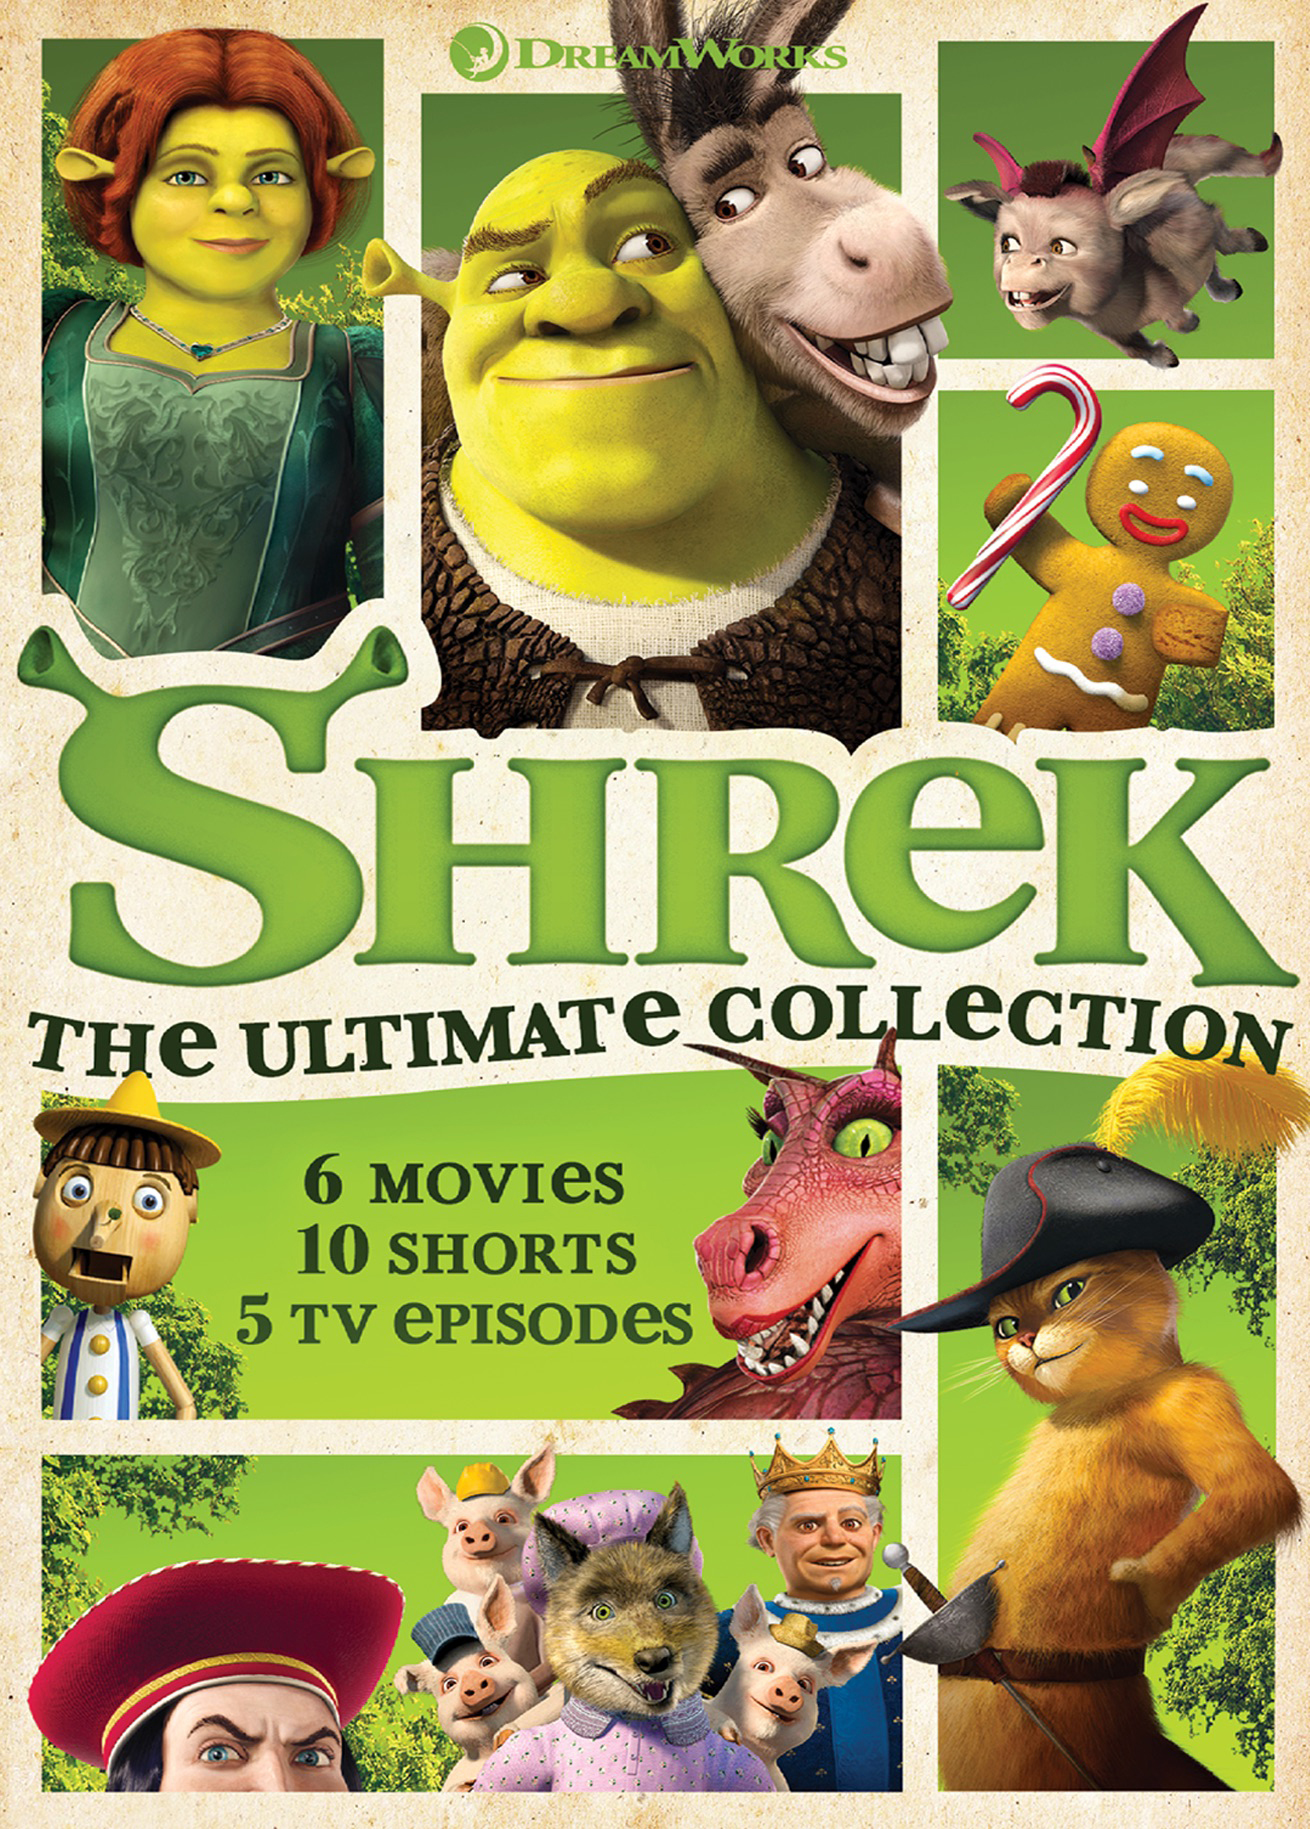 Shrek: The Ultimate Collection (DVD Set) - DVD [ 2010 ]  - Children Movies On DVD - Movies On GRUV